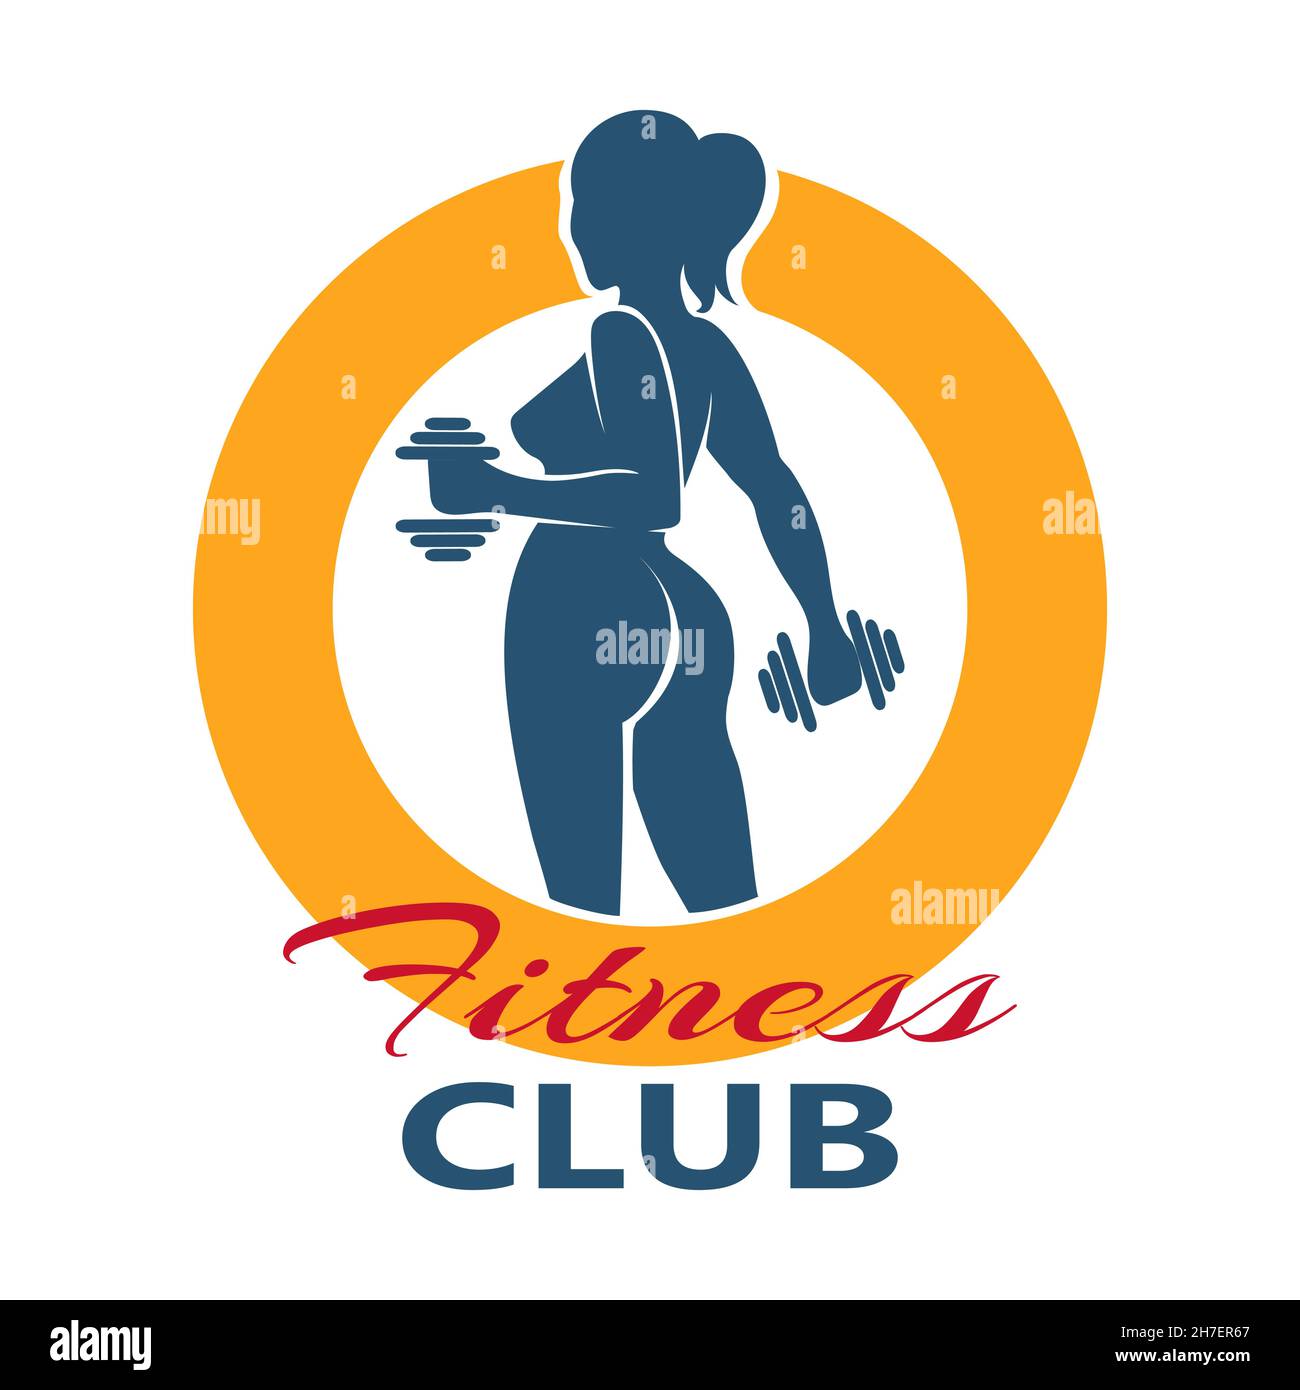 Fitness club logo or emblem with woman silhouette. Woman holds dumbbells. Isolated on white background. Stock Vector